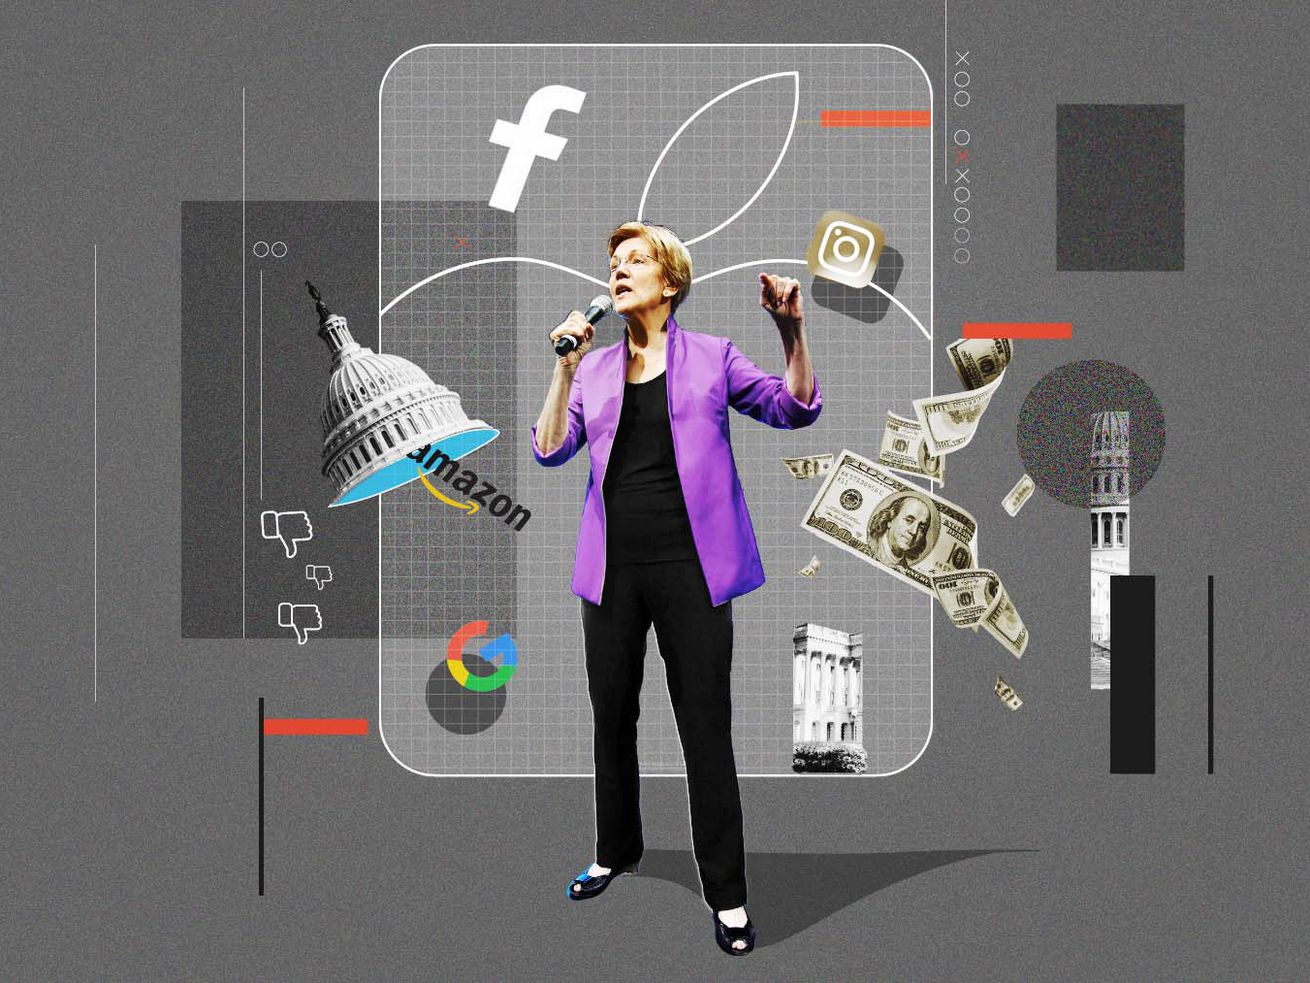 Photo collage of Senator Elizabeth Warren surrounded by representations of topics that relate to her, like money and the Facebook logo.